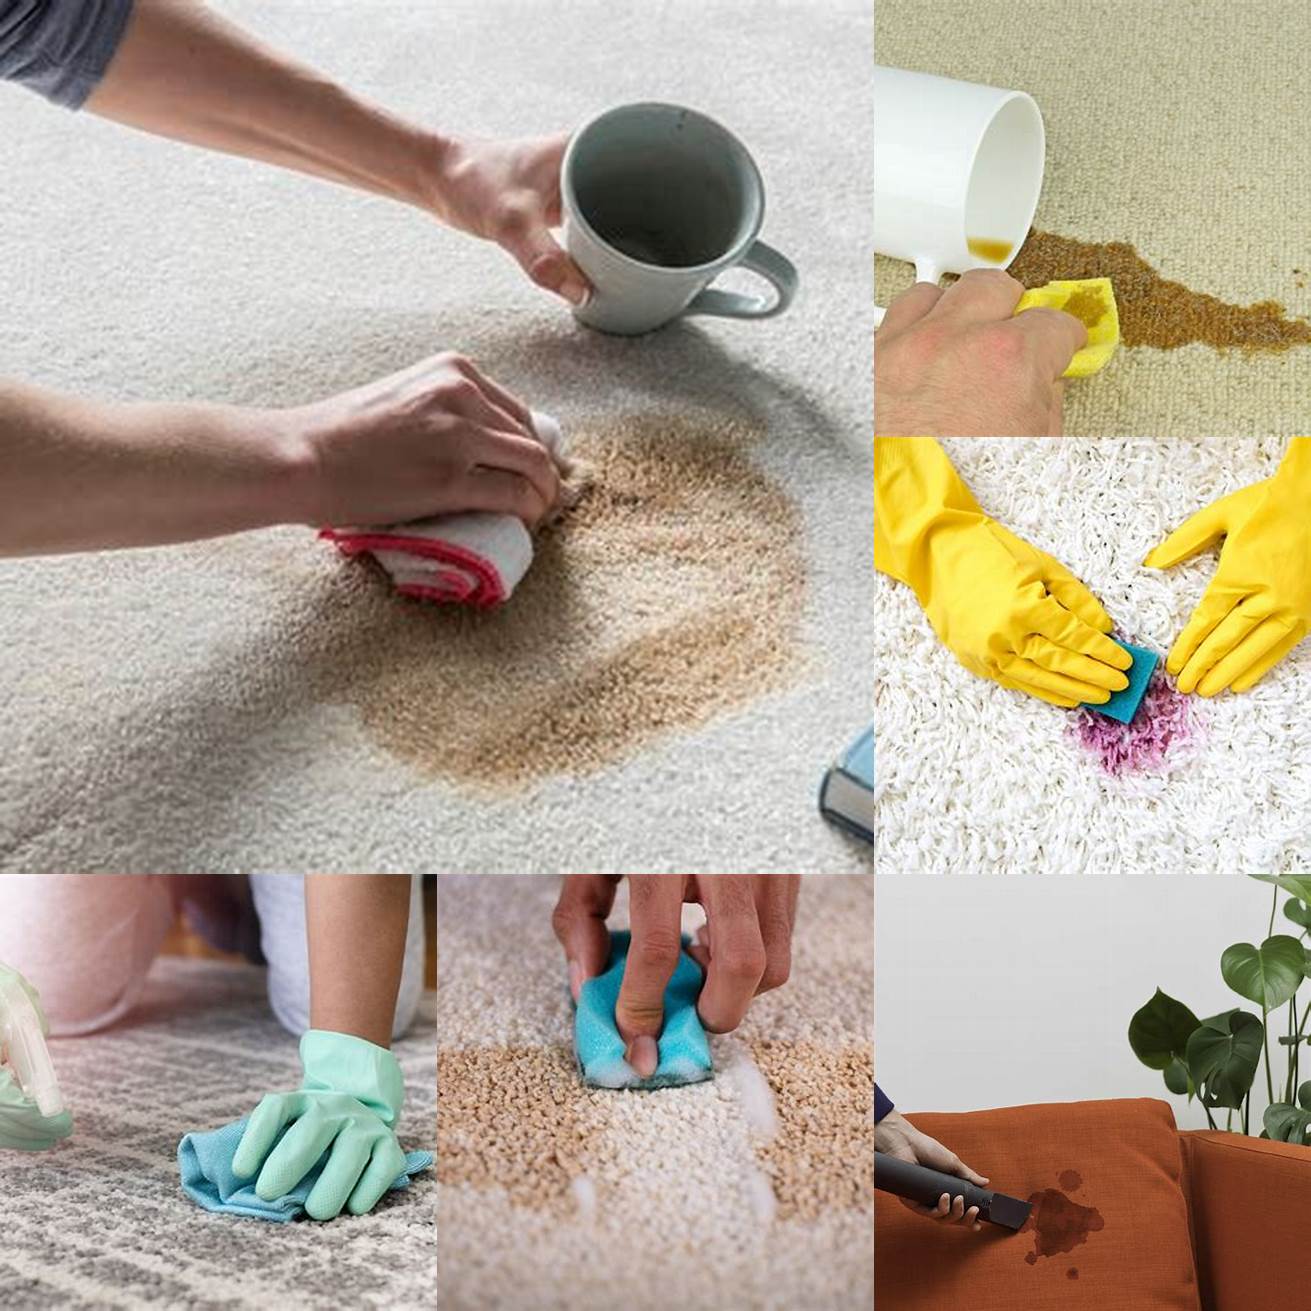 Spot clean any stains or spills as soon as possible to prevent them from setting